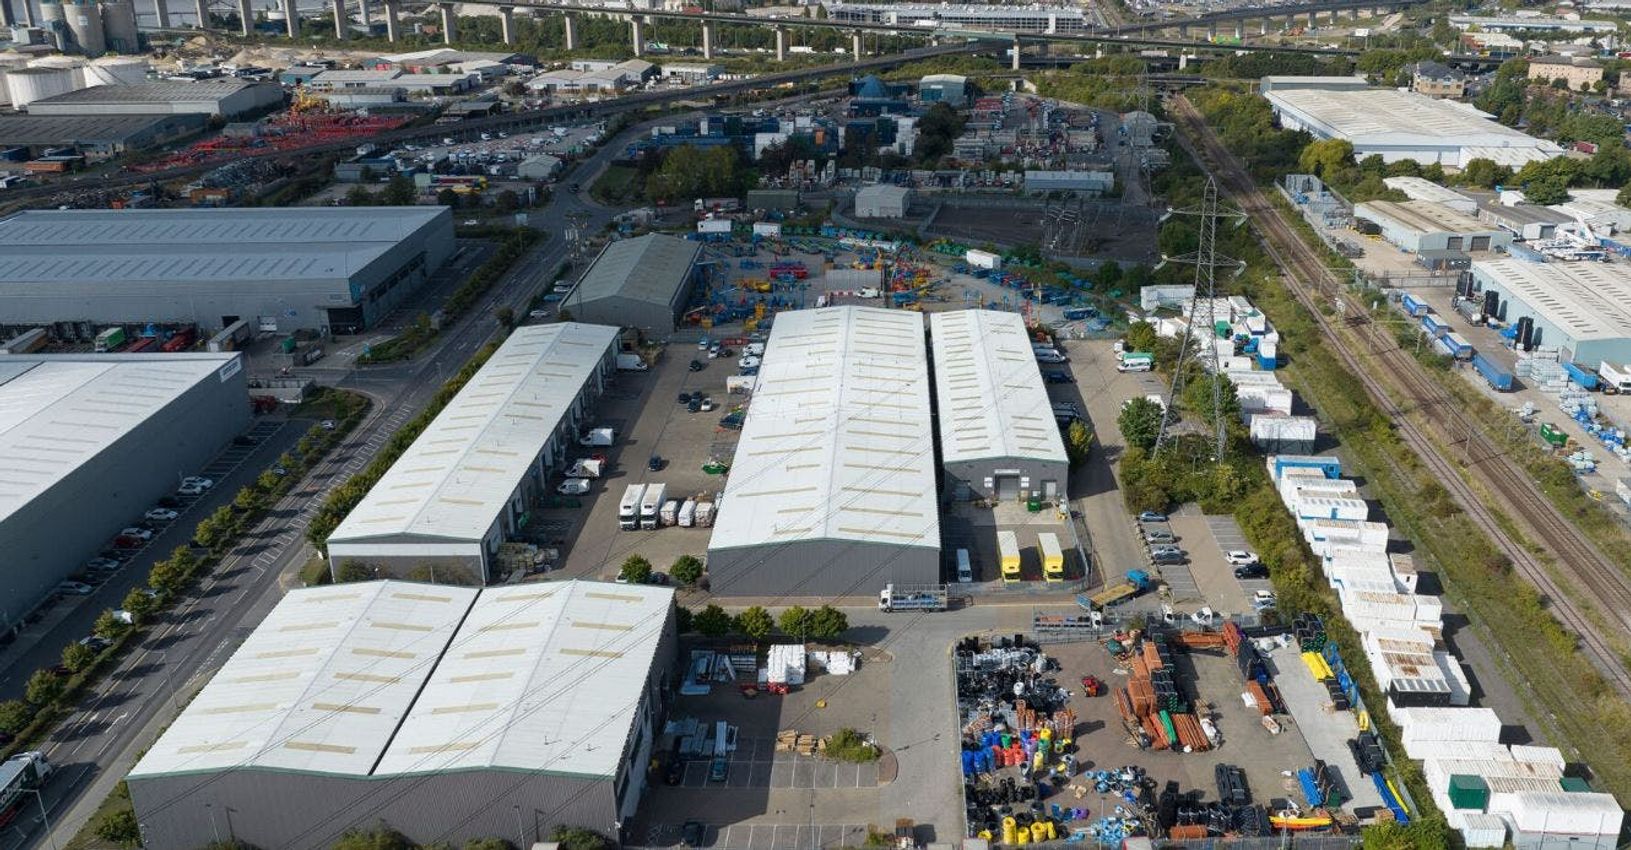 Units 6-8 Thurrock Trade Park, Oliver Road, West Thurrock, RM20 3ED